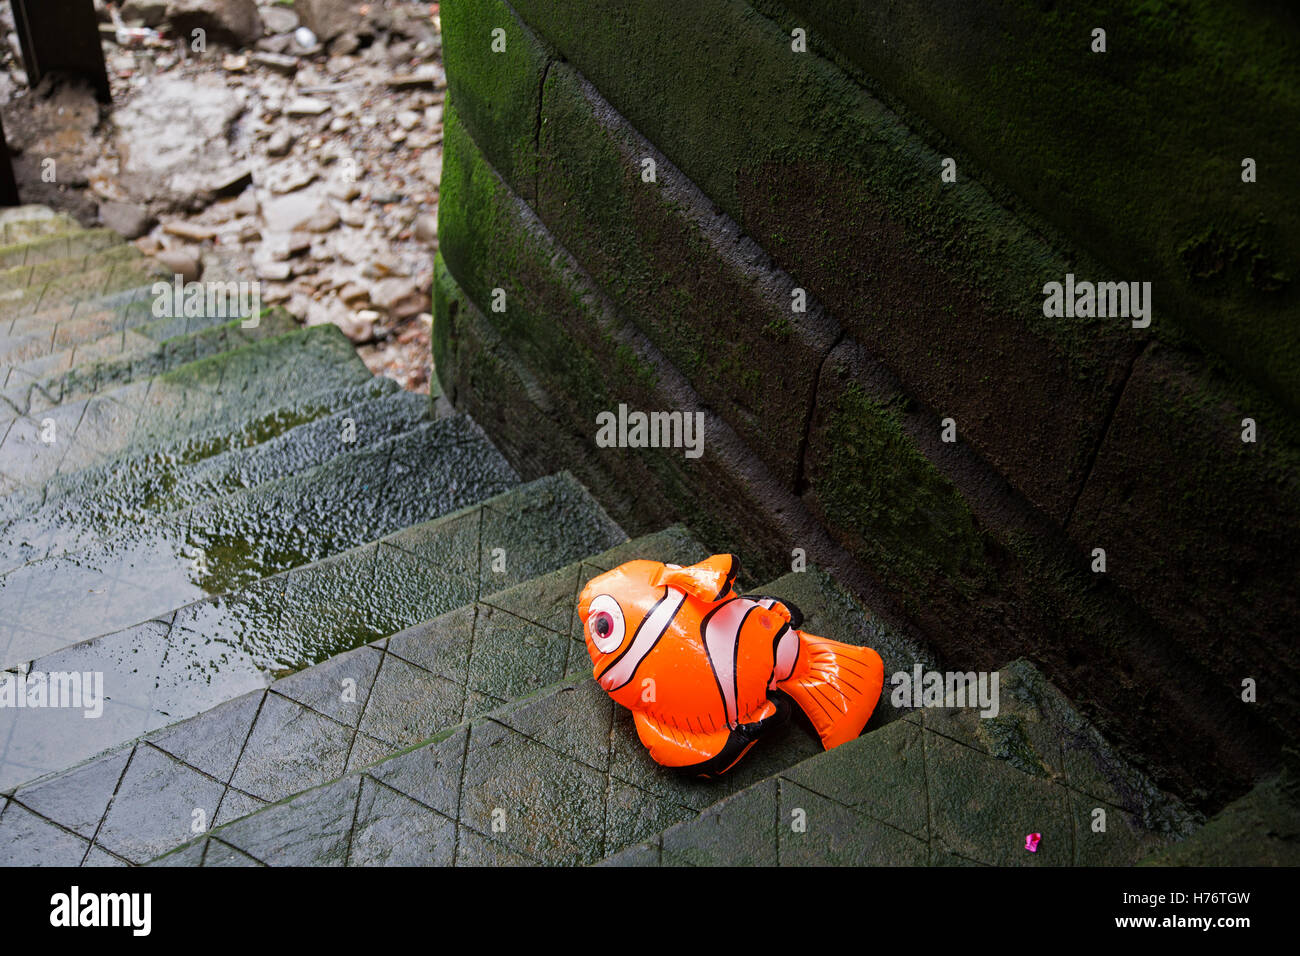 Inflatable Finding Nemo character washed up on some old steps leading down to the River Thames in London, England, United Kingdom. Finding Nemo is a 2003 American computer-animated comedy-drama adventure film produced by Pixar Animation Studios and released by Walt Disney Pictures. Stock Photo